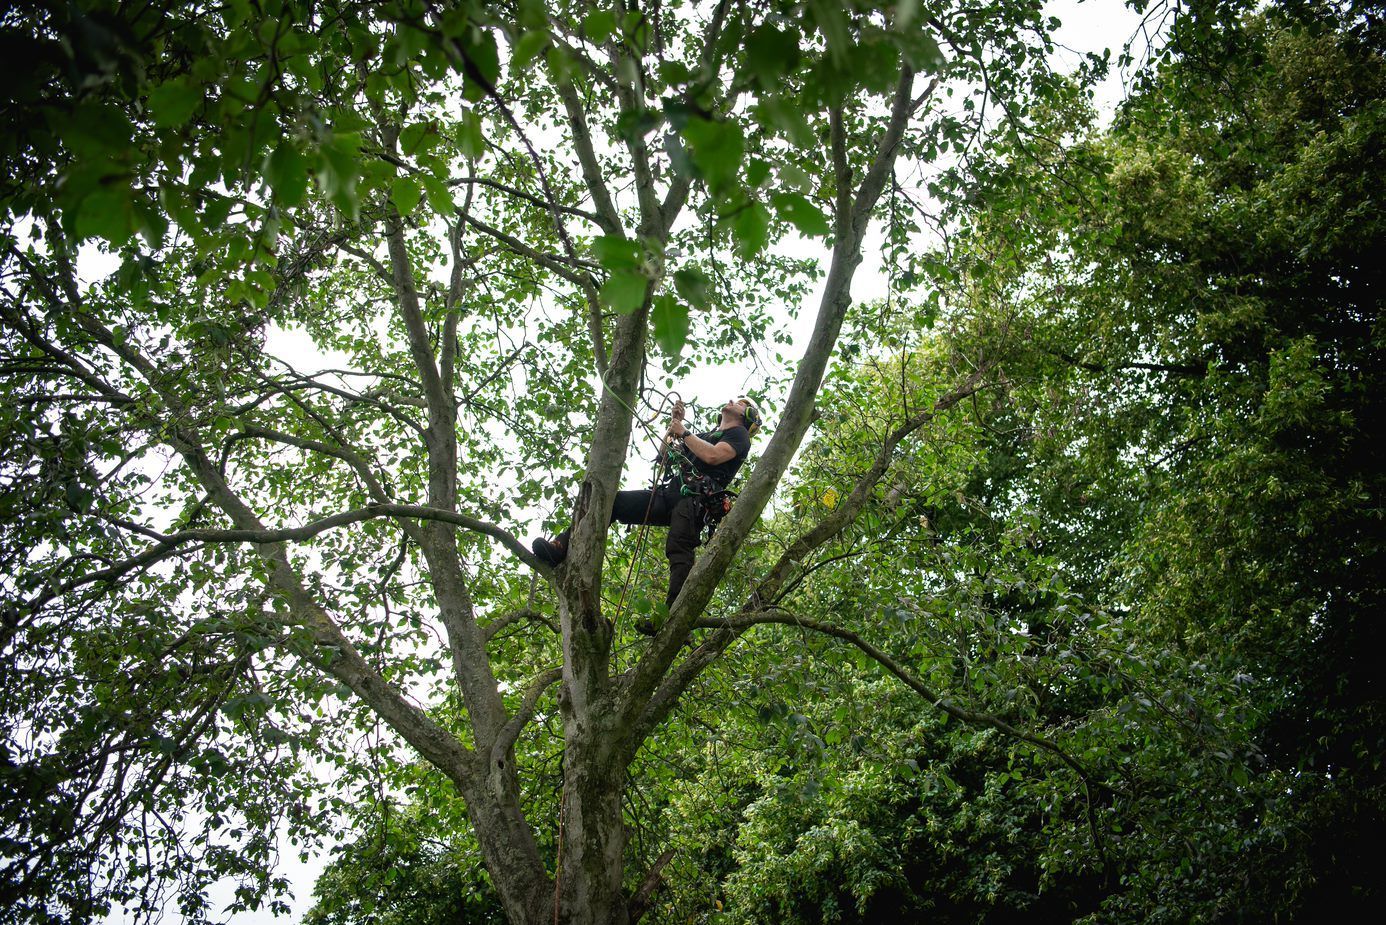 Providers of Forest Worker Injury Care Training UK